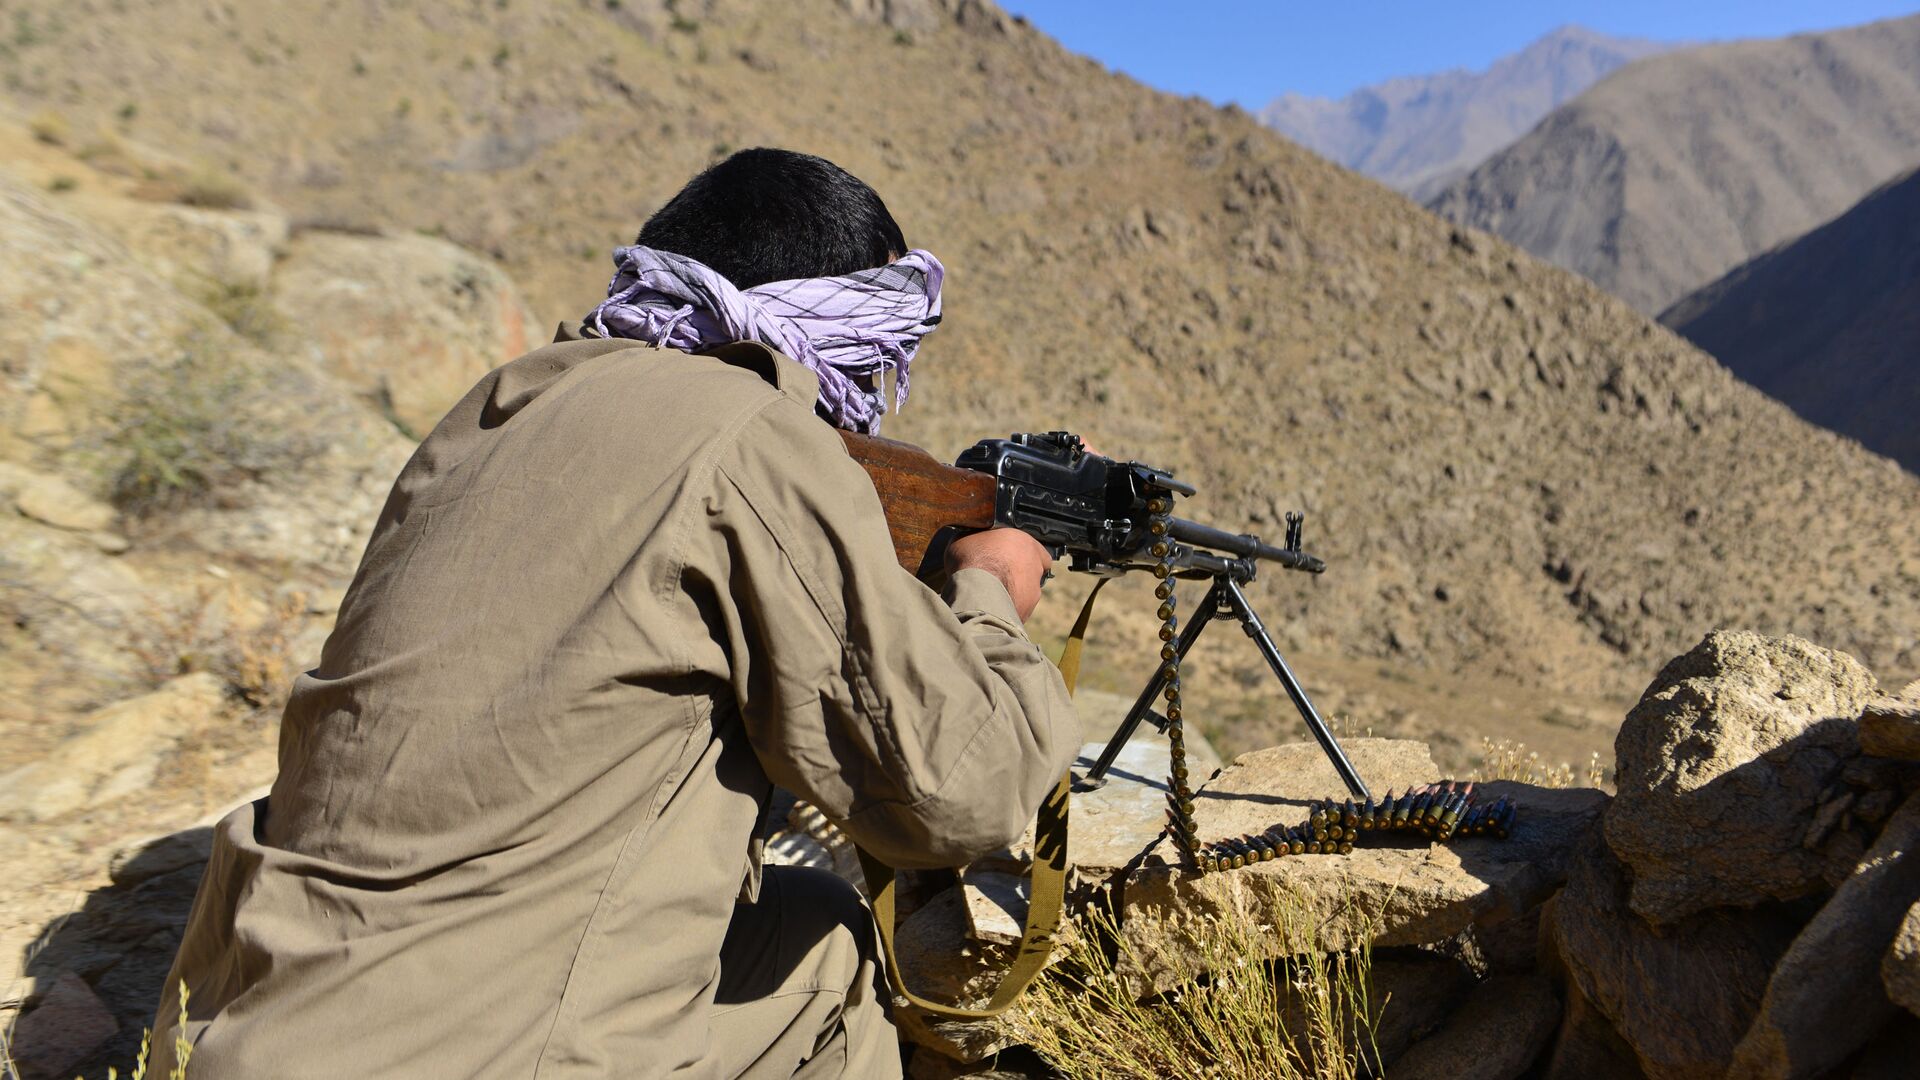 The Afghan resistance movement and anti-Taliban uprising forces personnel take part in military training in the Malimah area of Dara district in Panjshir province on 2 September 2021 as the valley remains the last major holdout of anti-Taliban forces. - Sputnik International, 1920, 04.09.2021